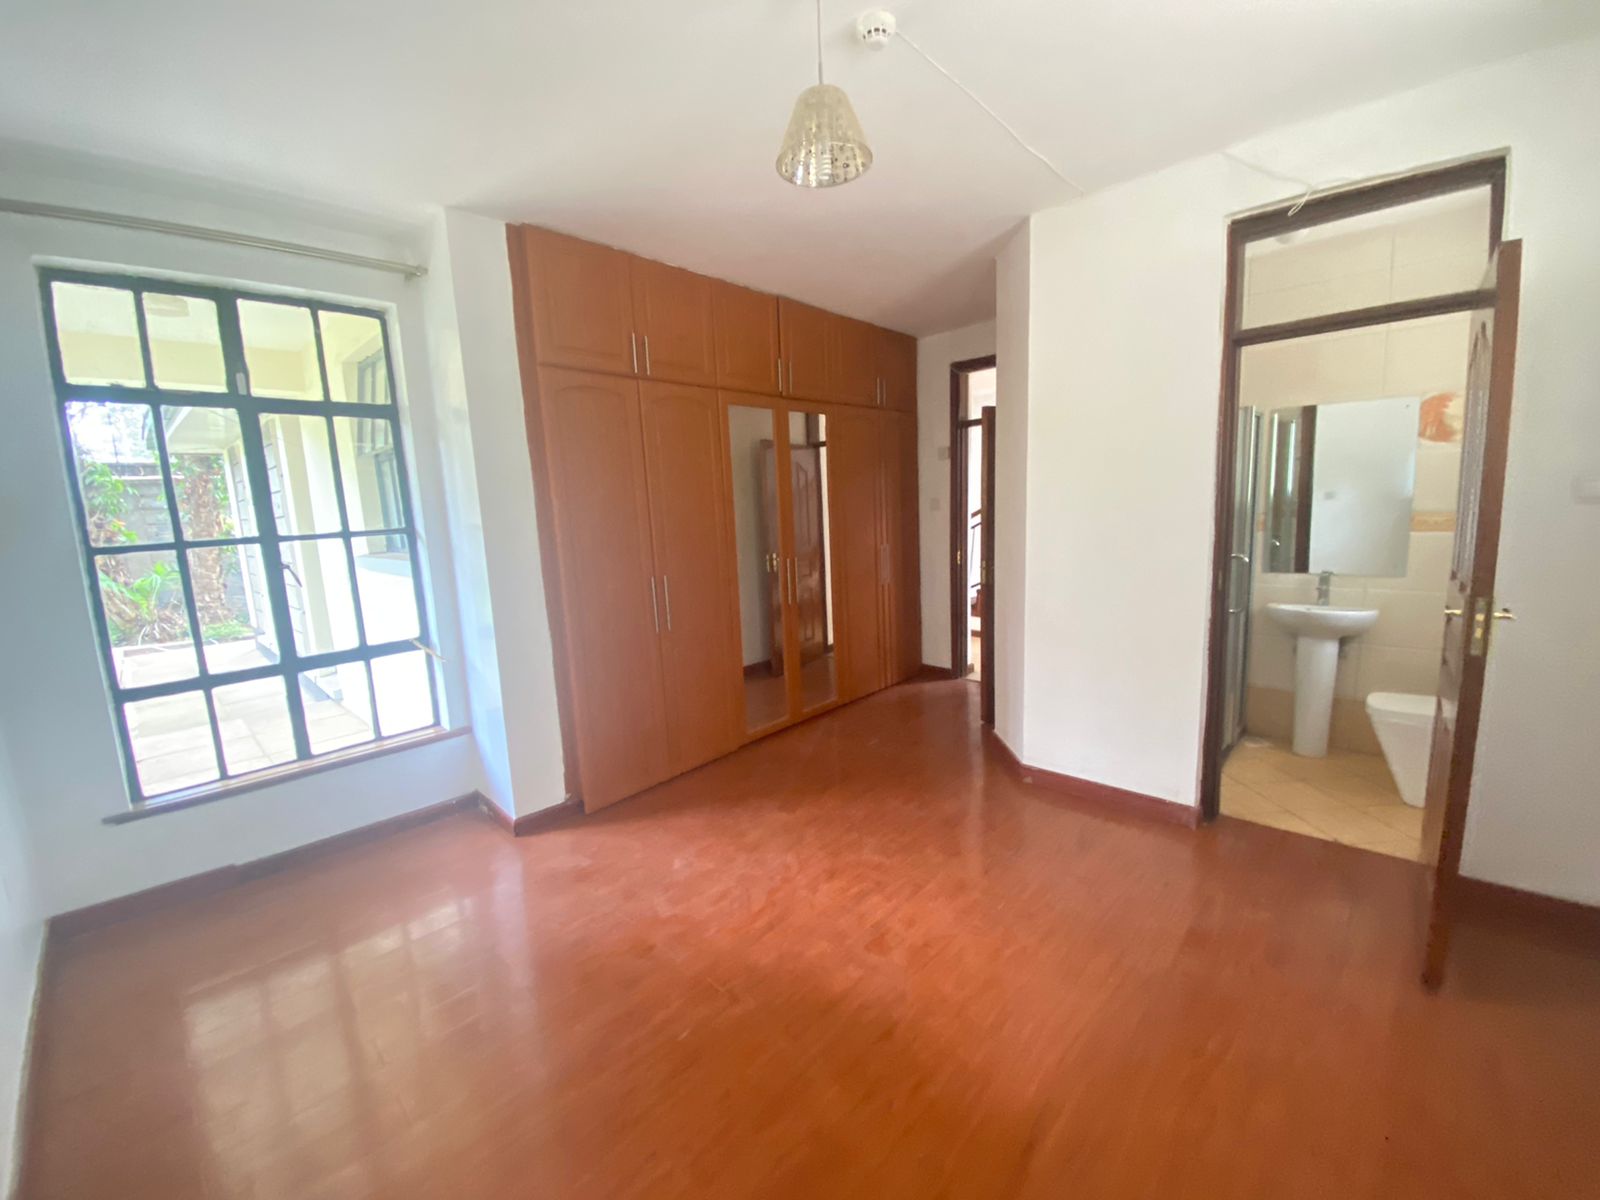 5 bedroom House in lavington all ensuite plus dsq for Sale at Ksh47m Negotiable (23)